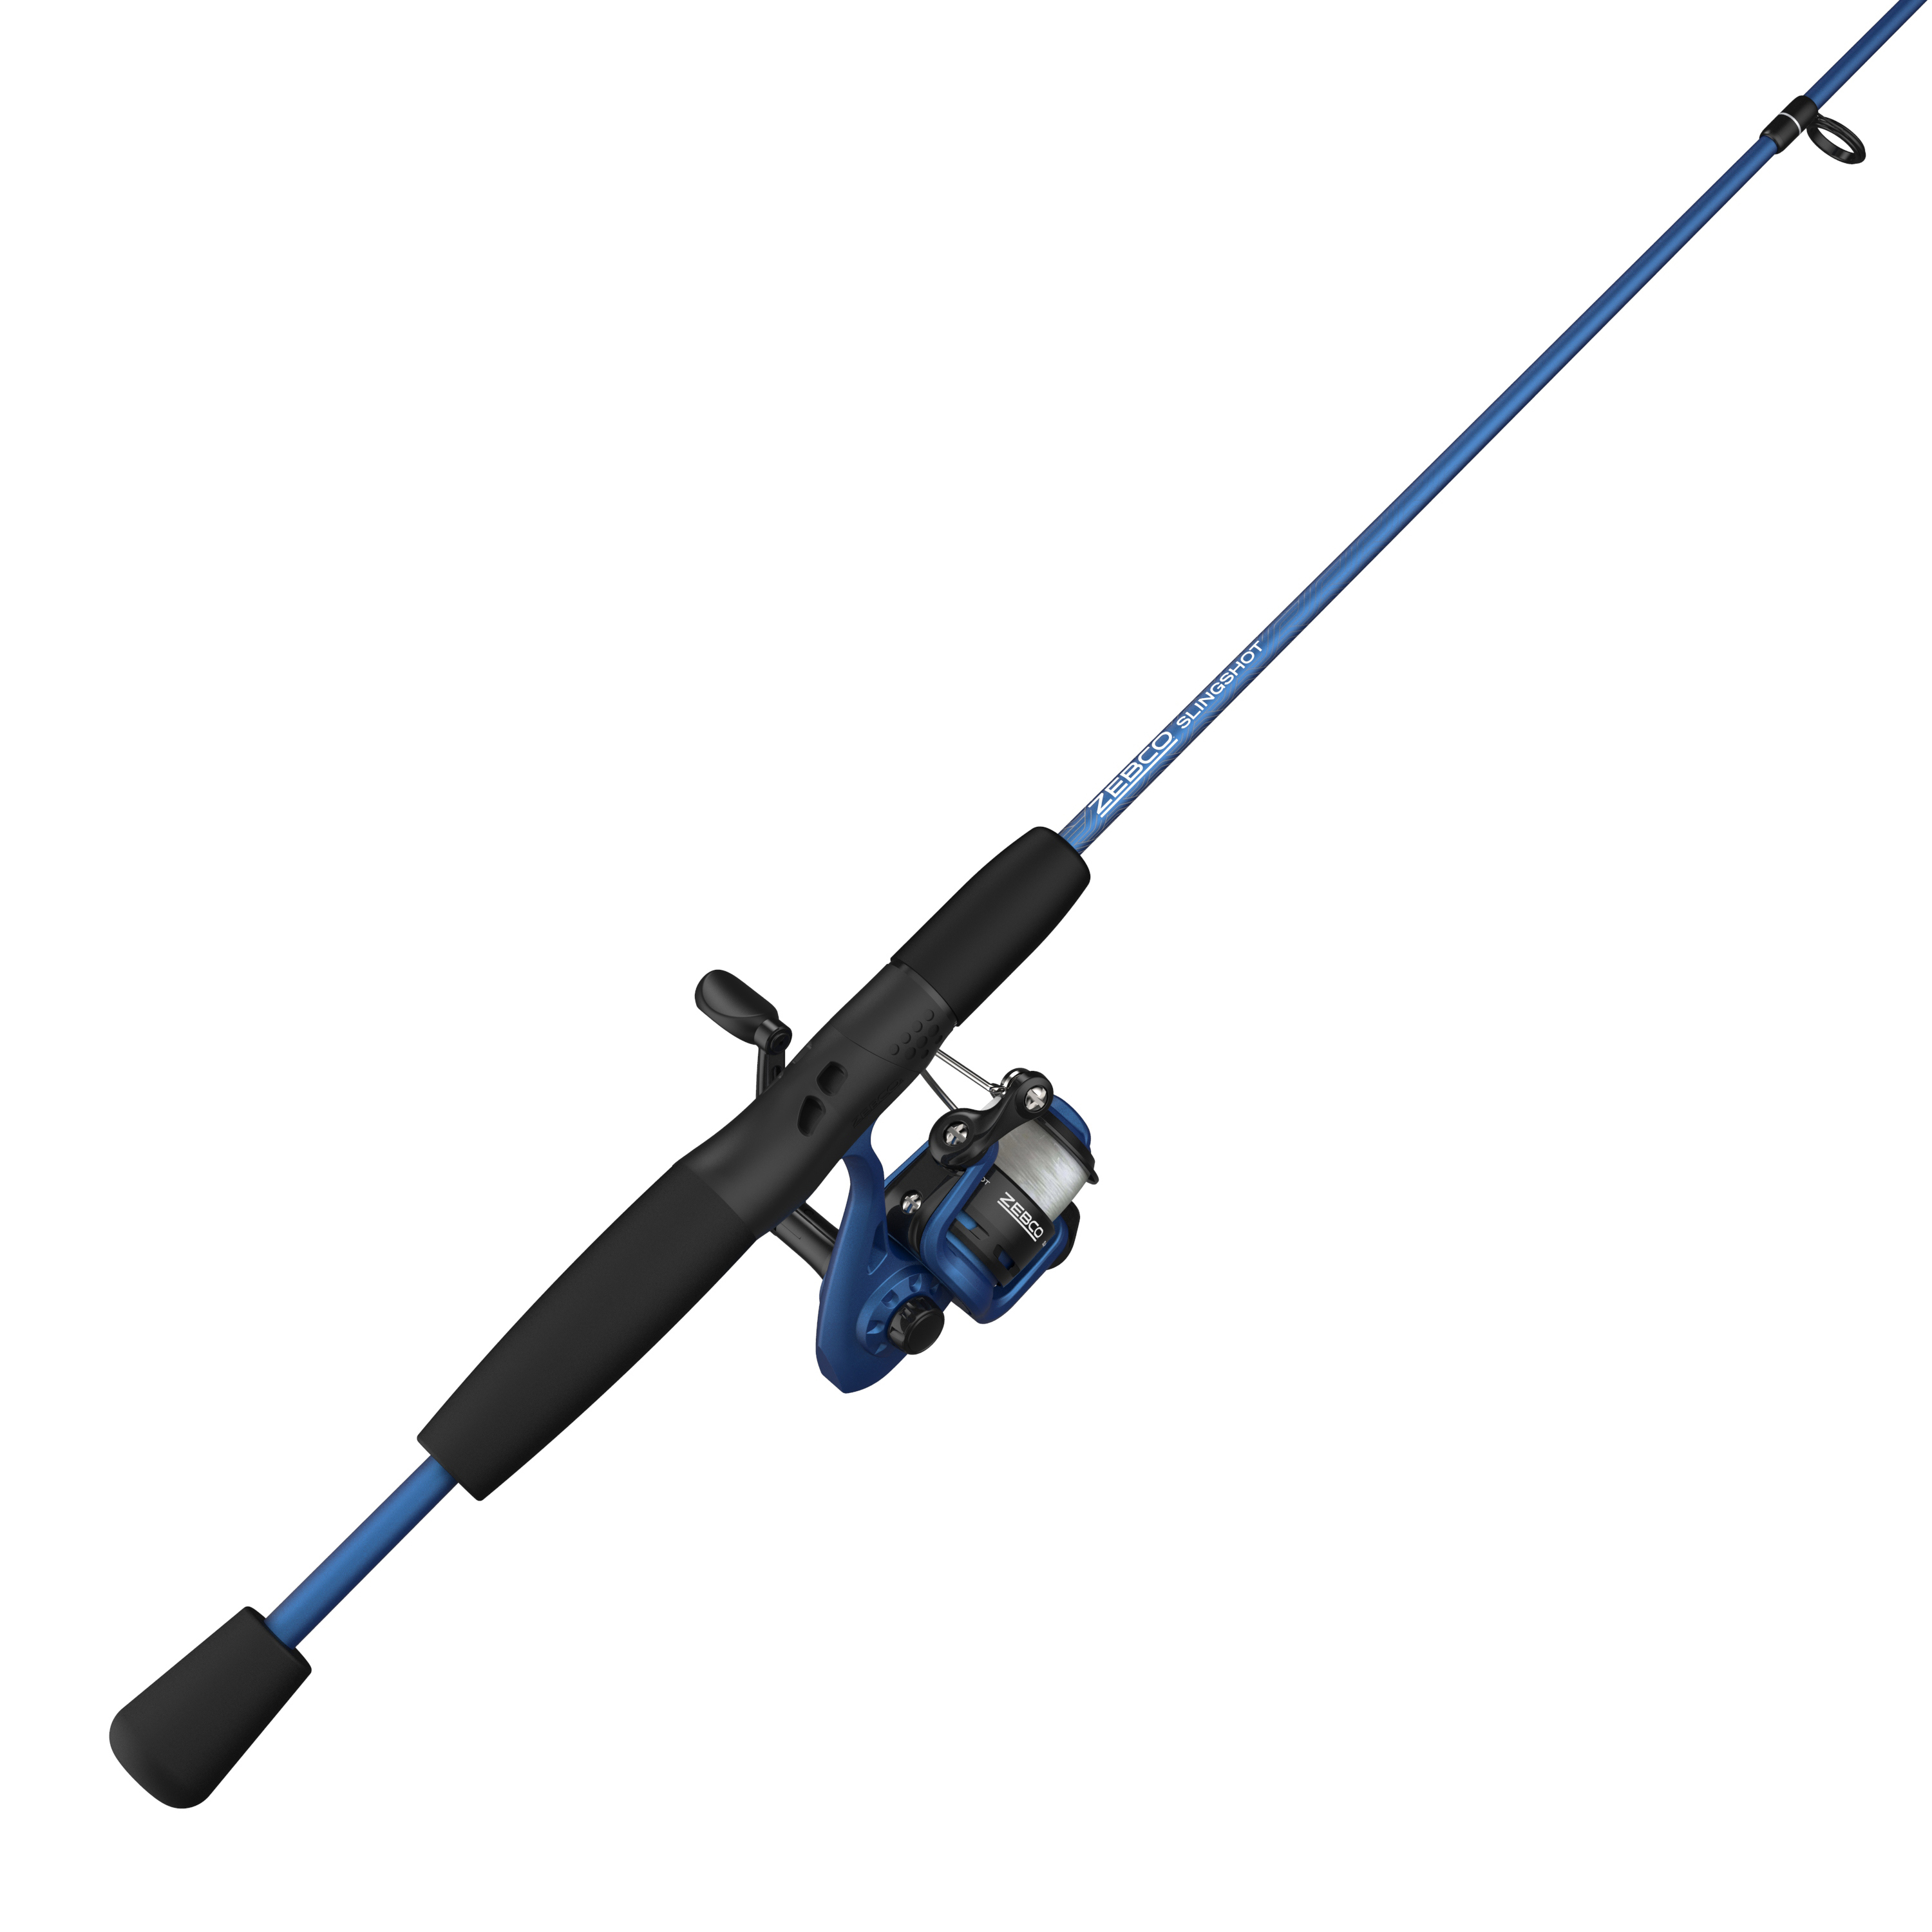 Spinning Combo Fishing Rod 2 pc Medium Action, 6 ft 3 in